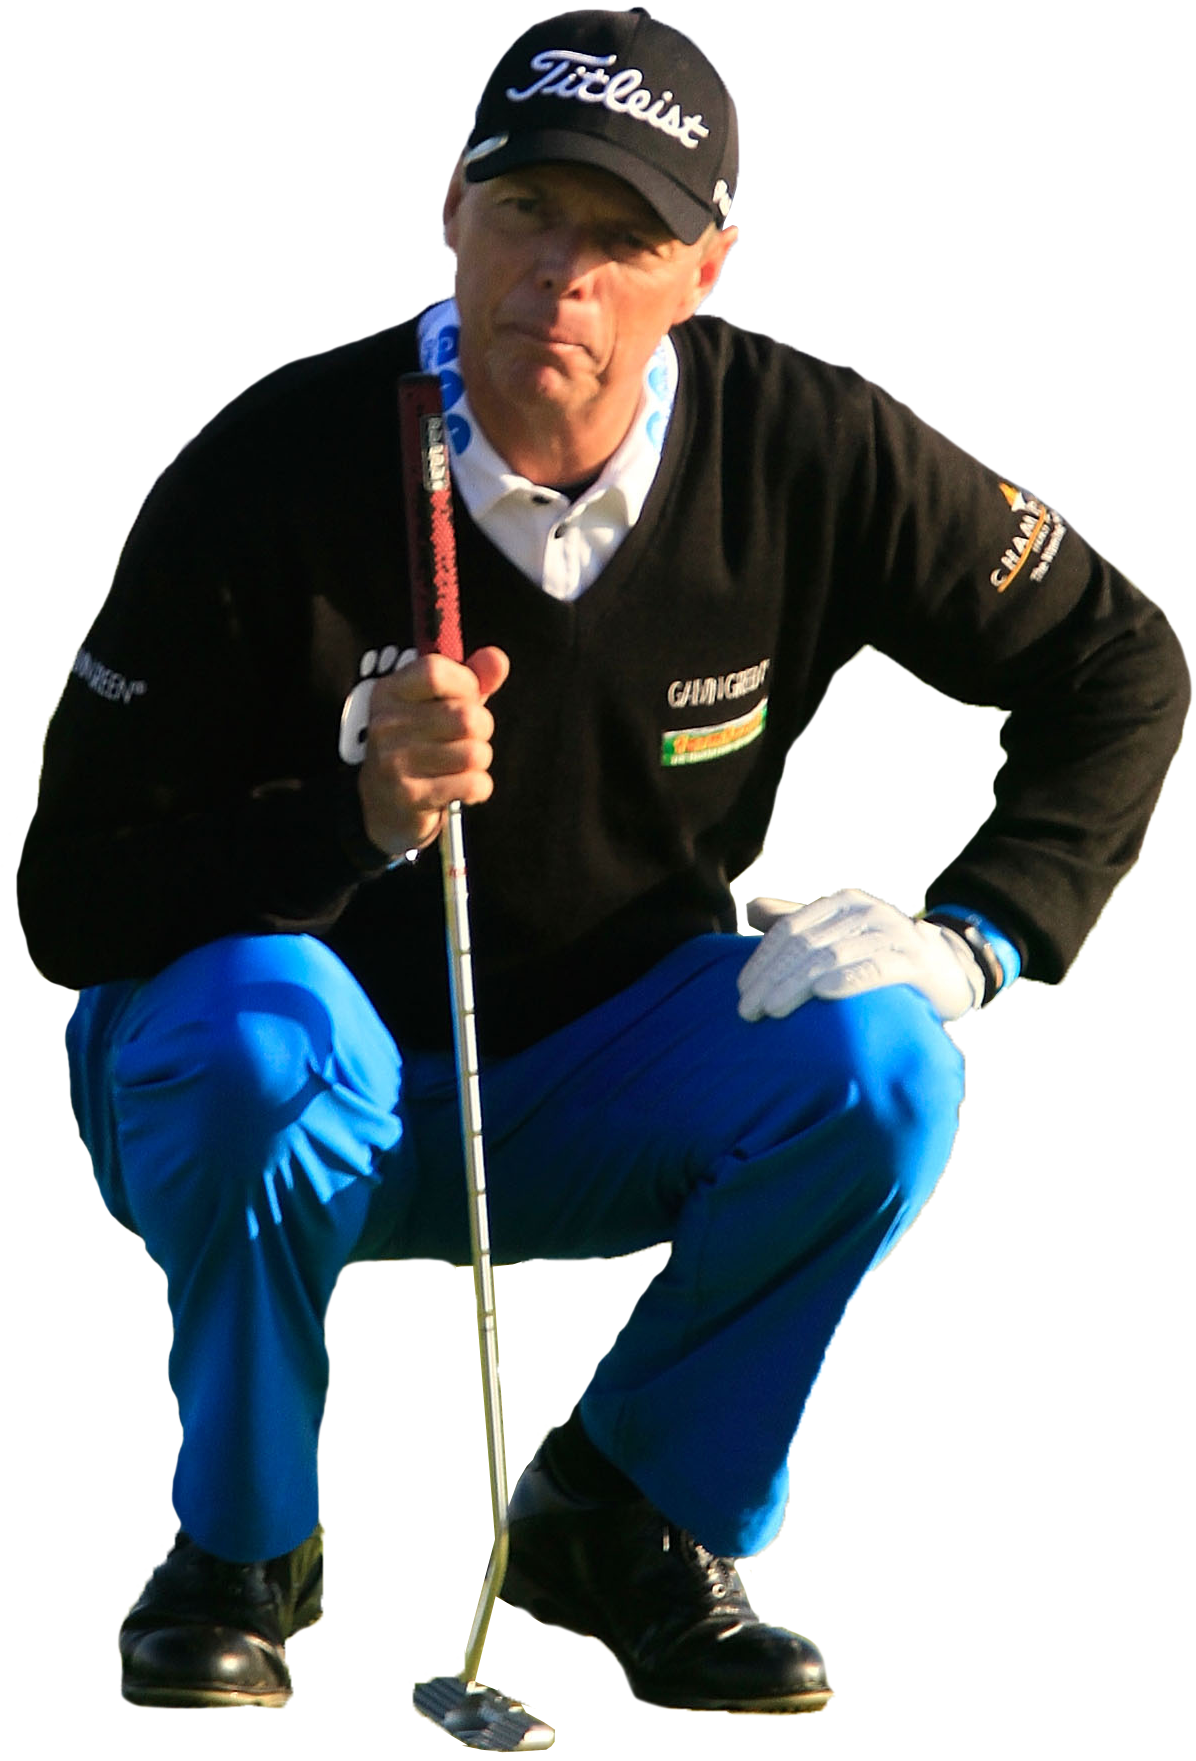 Golfer Clipart PNG Image